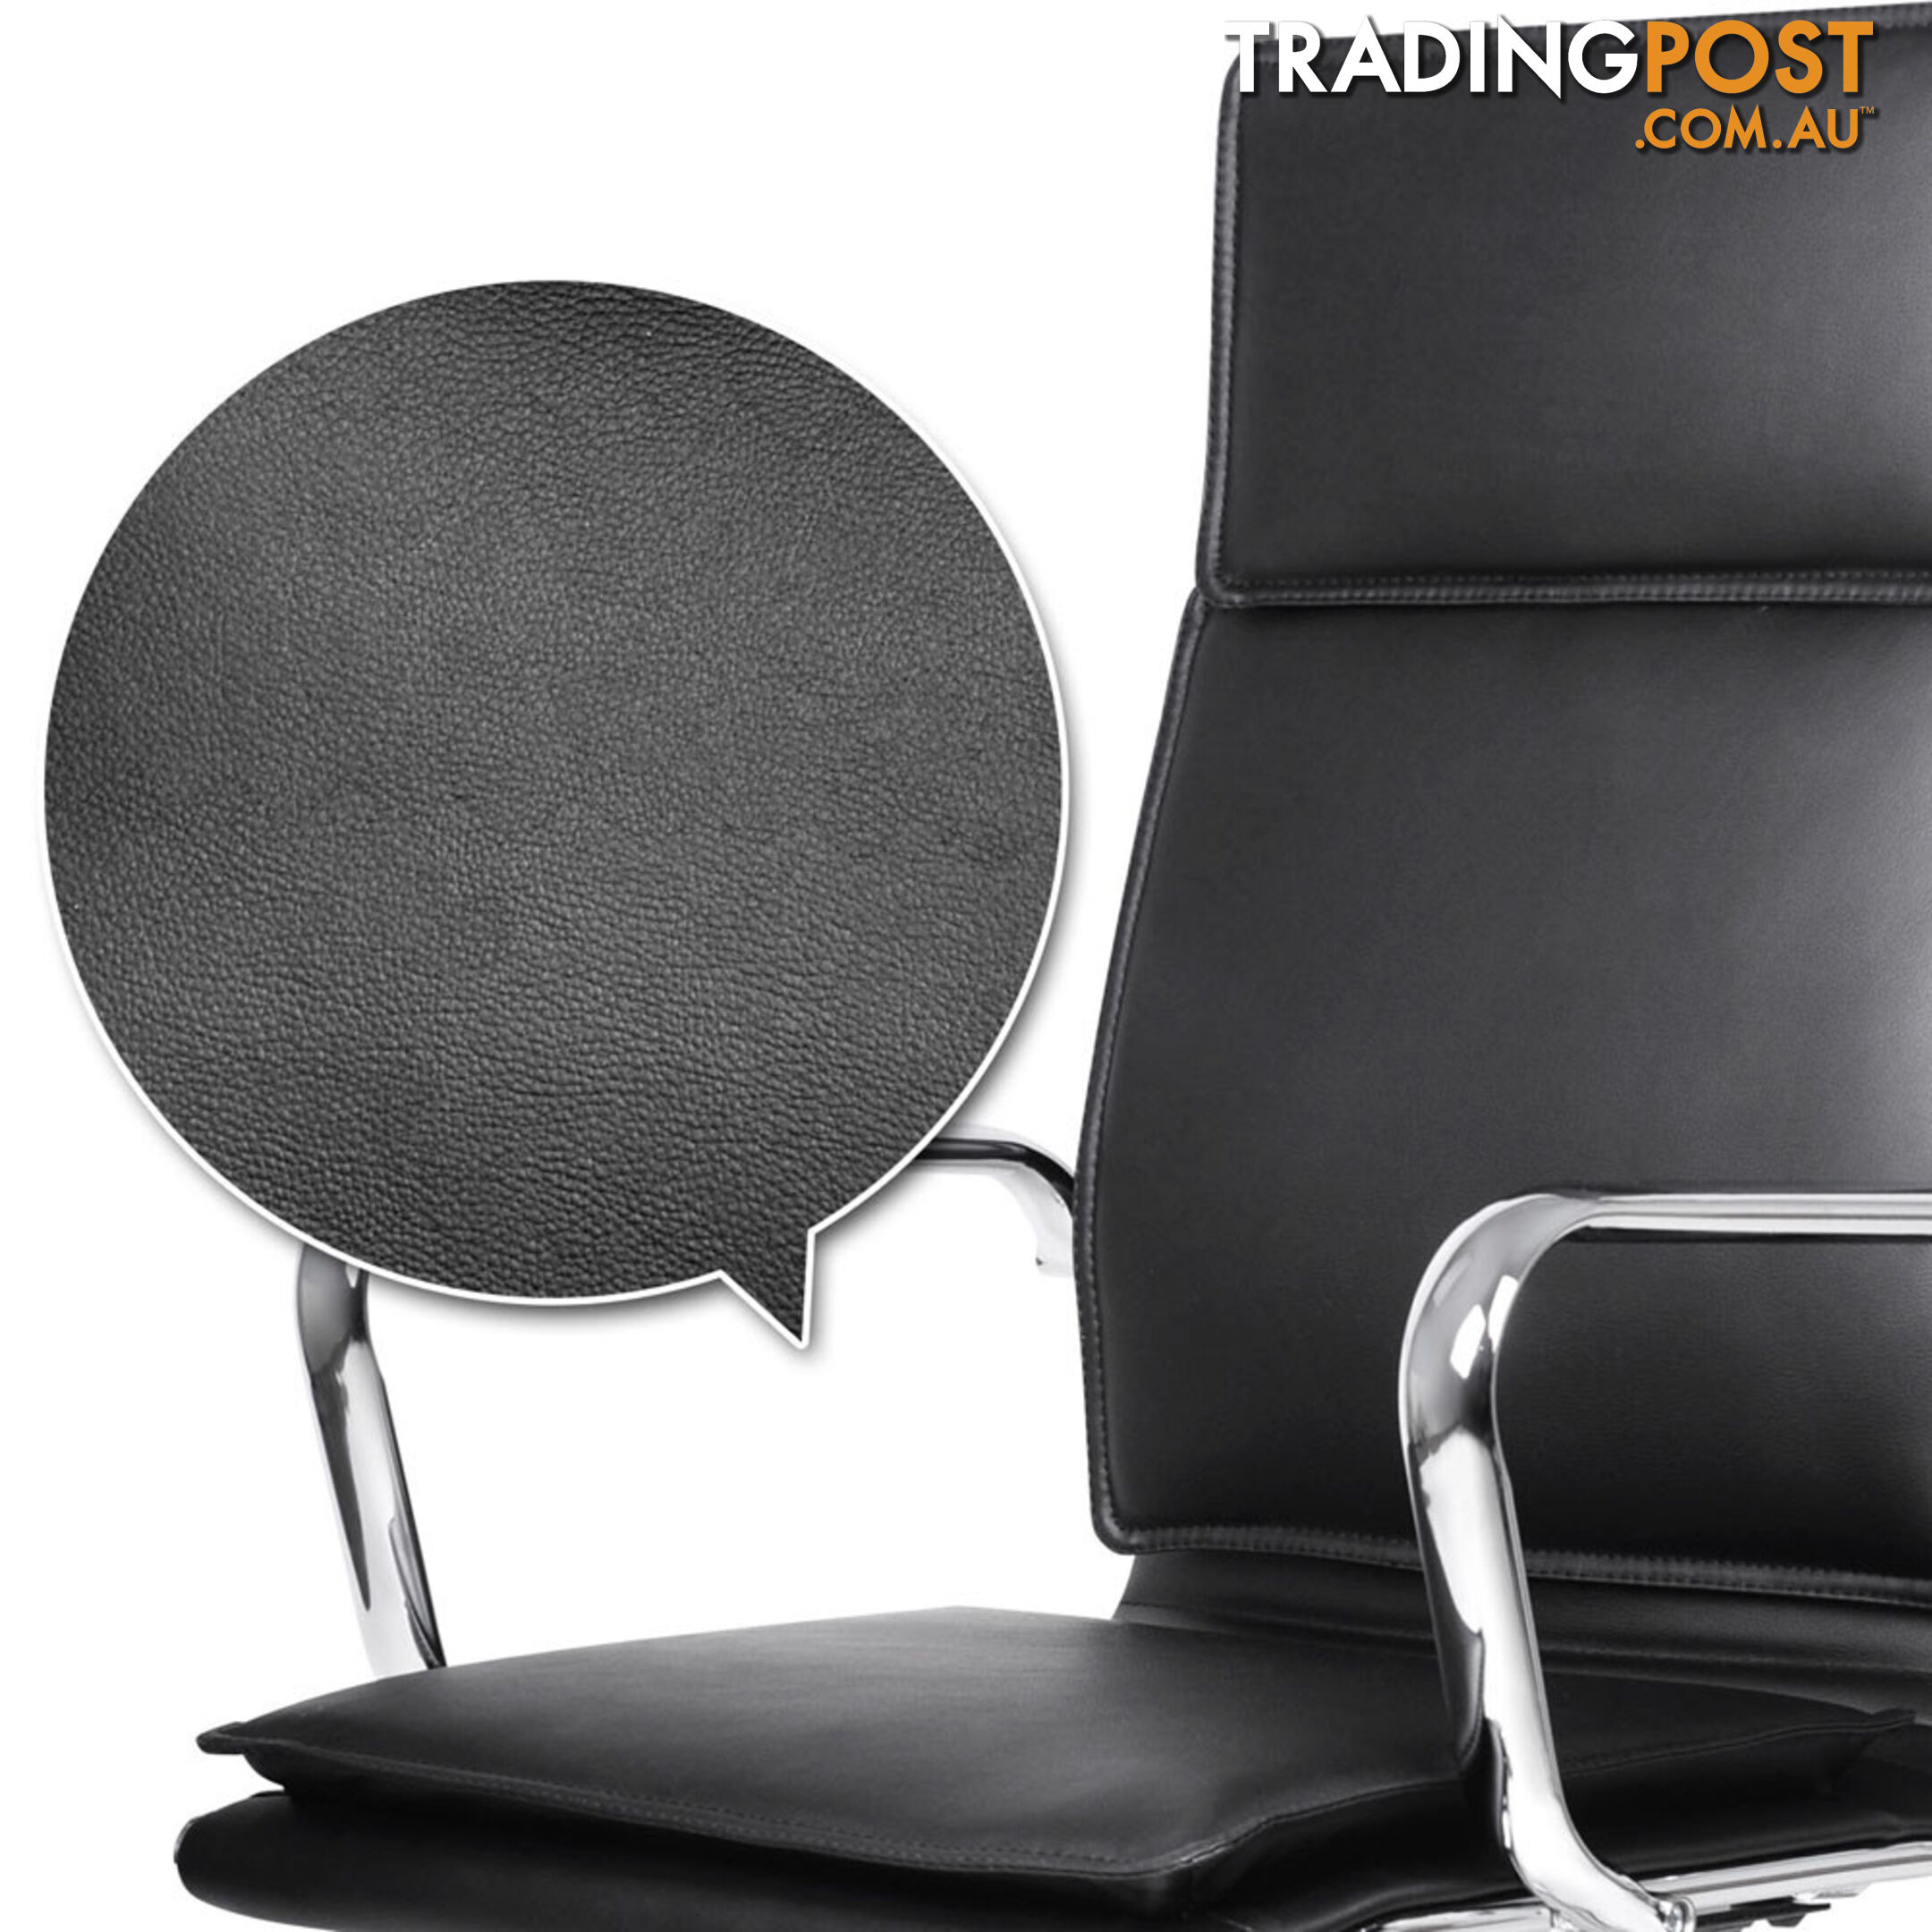 Executive PU Leather Office Computer Chair Black